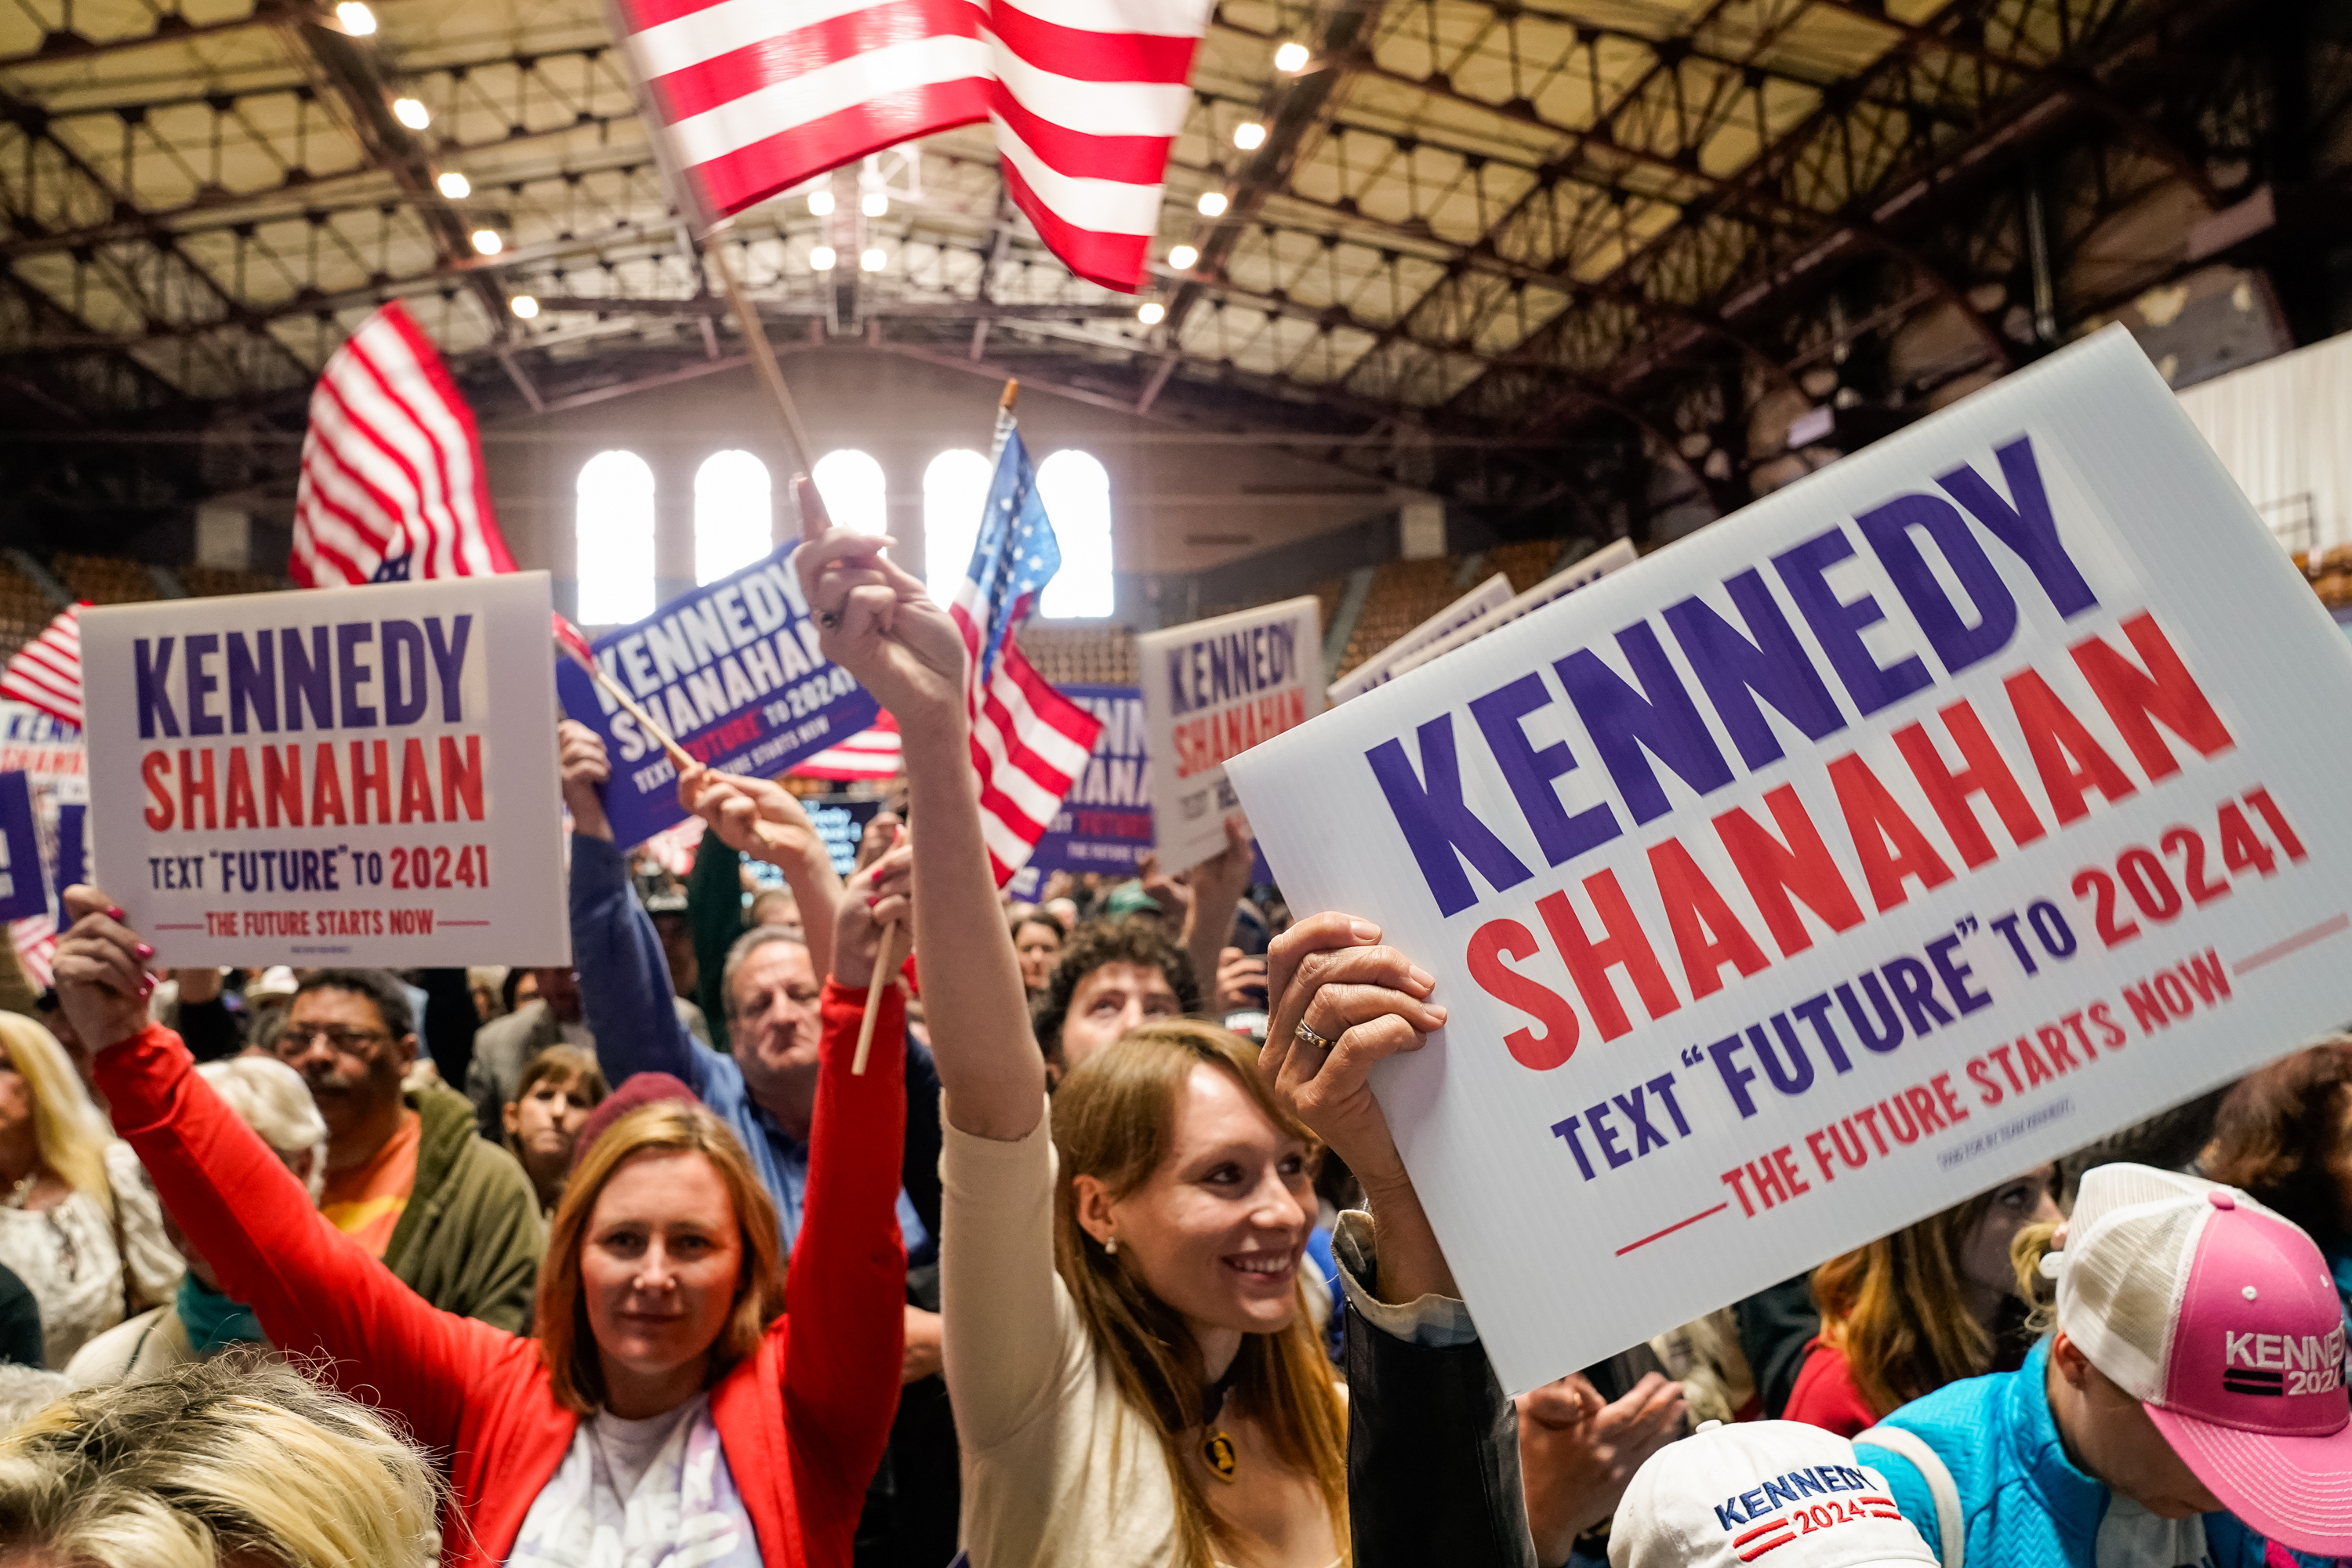 A crowd with &quot;KENNEDY SHANAHAN&quot; political signs, American flags, and a gymnasium backdrop.